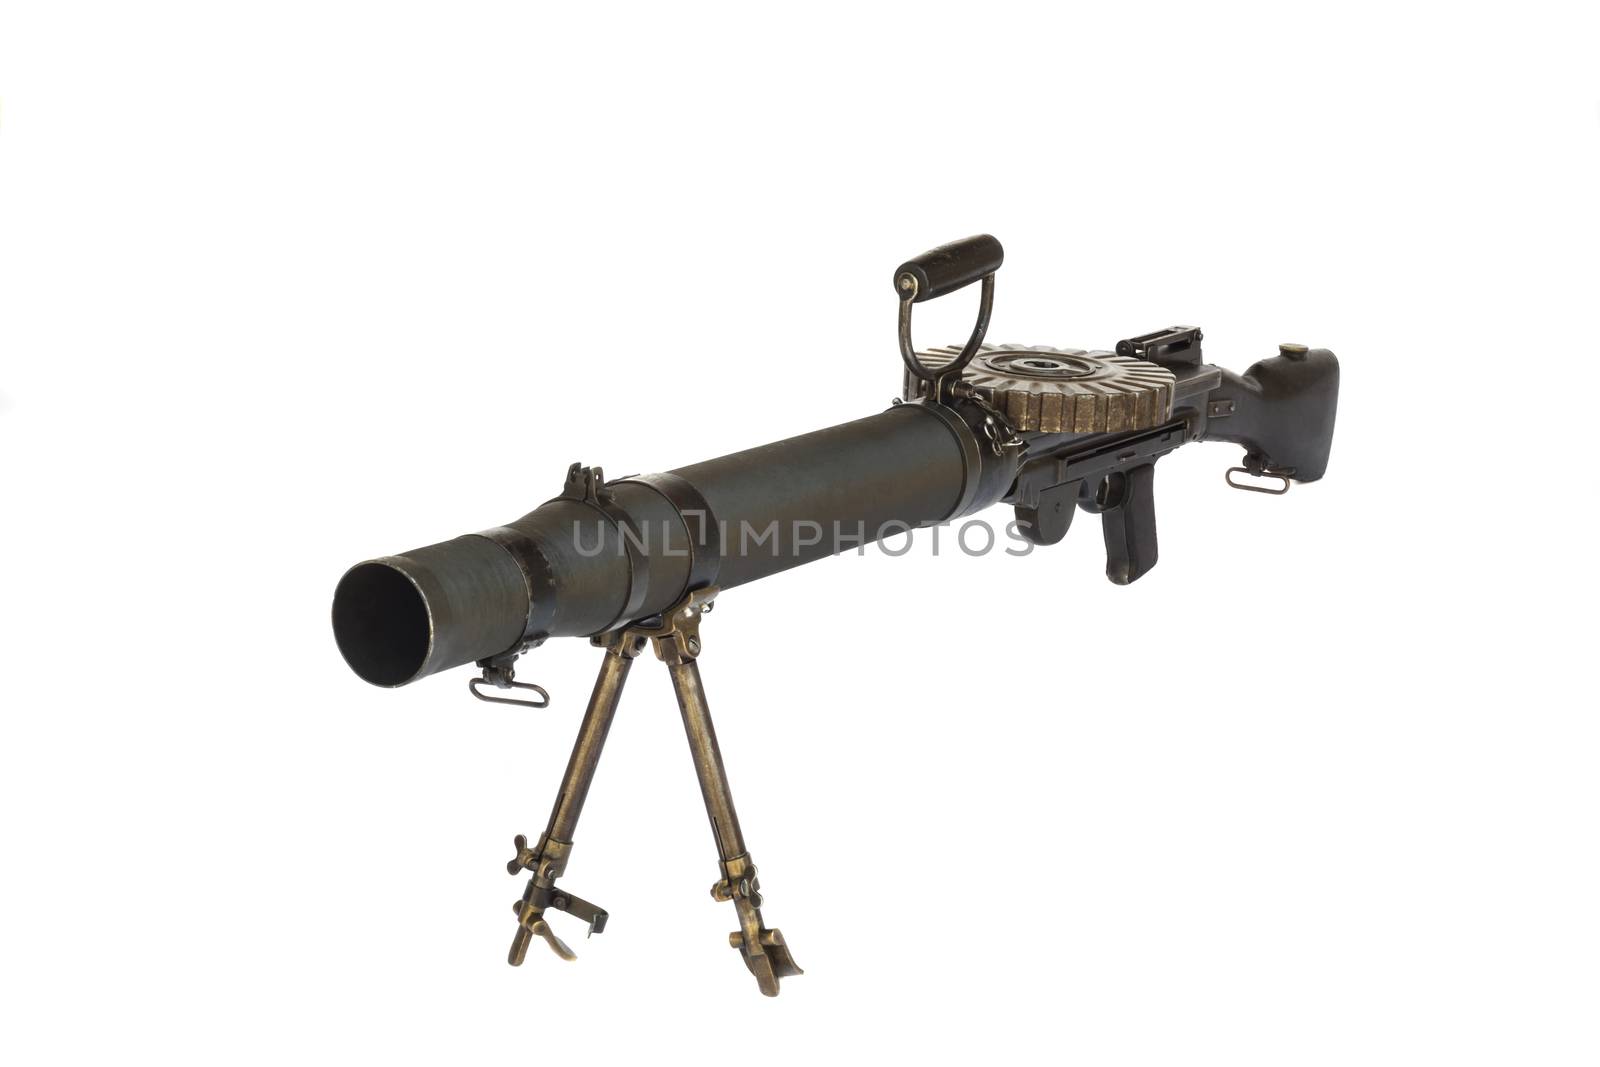 Old WW2 heavy machine gun front view isolated on white